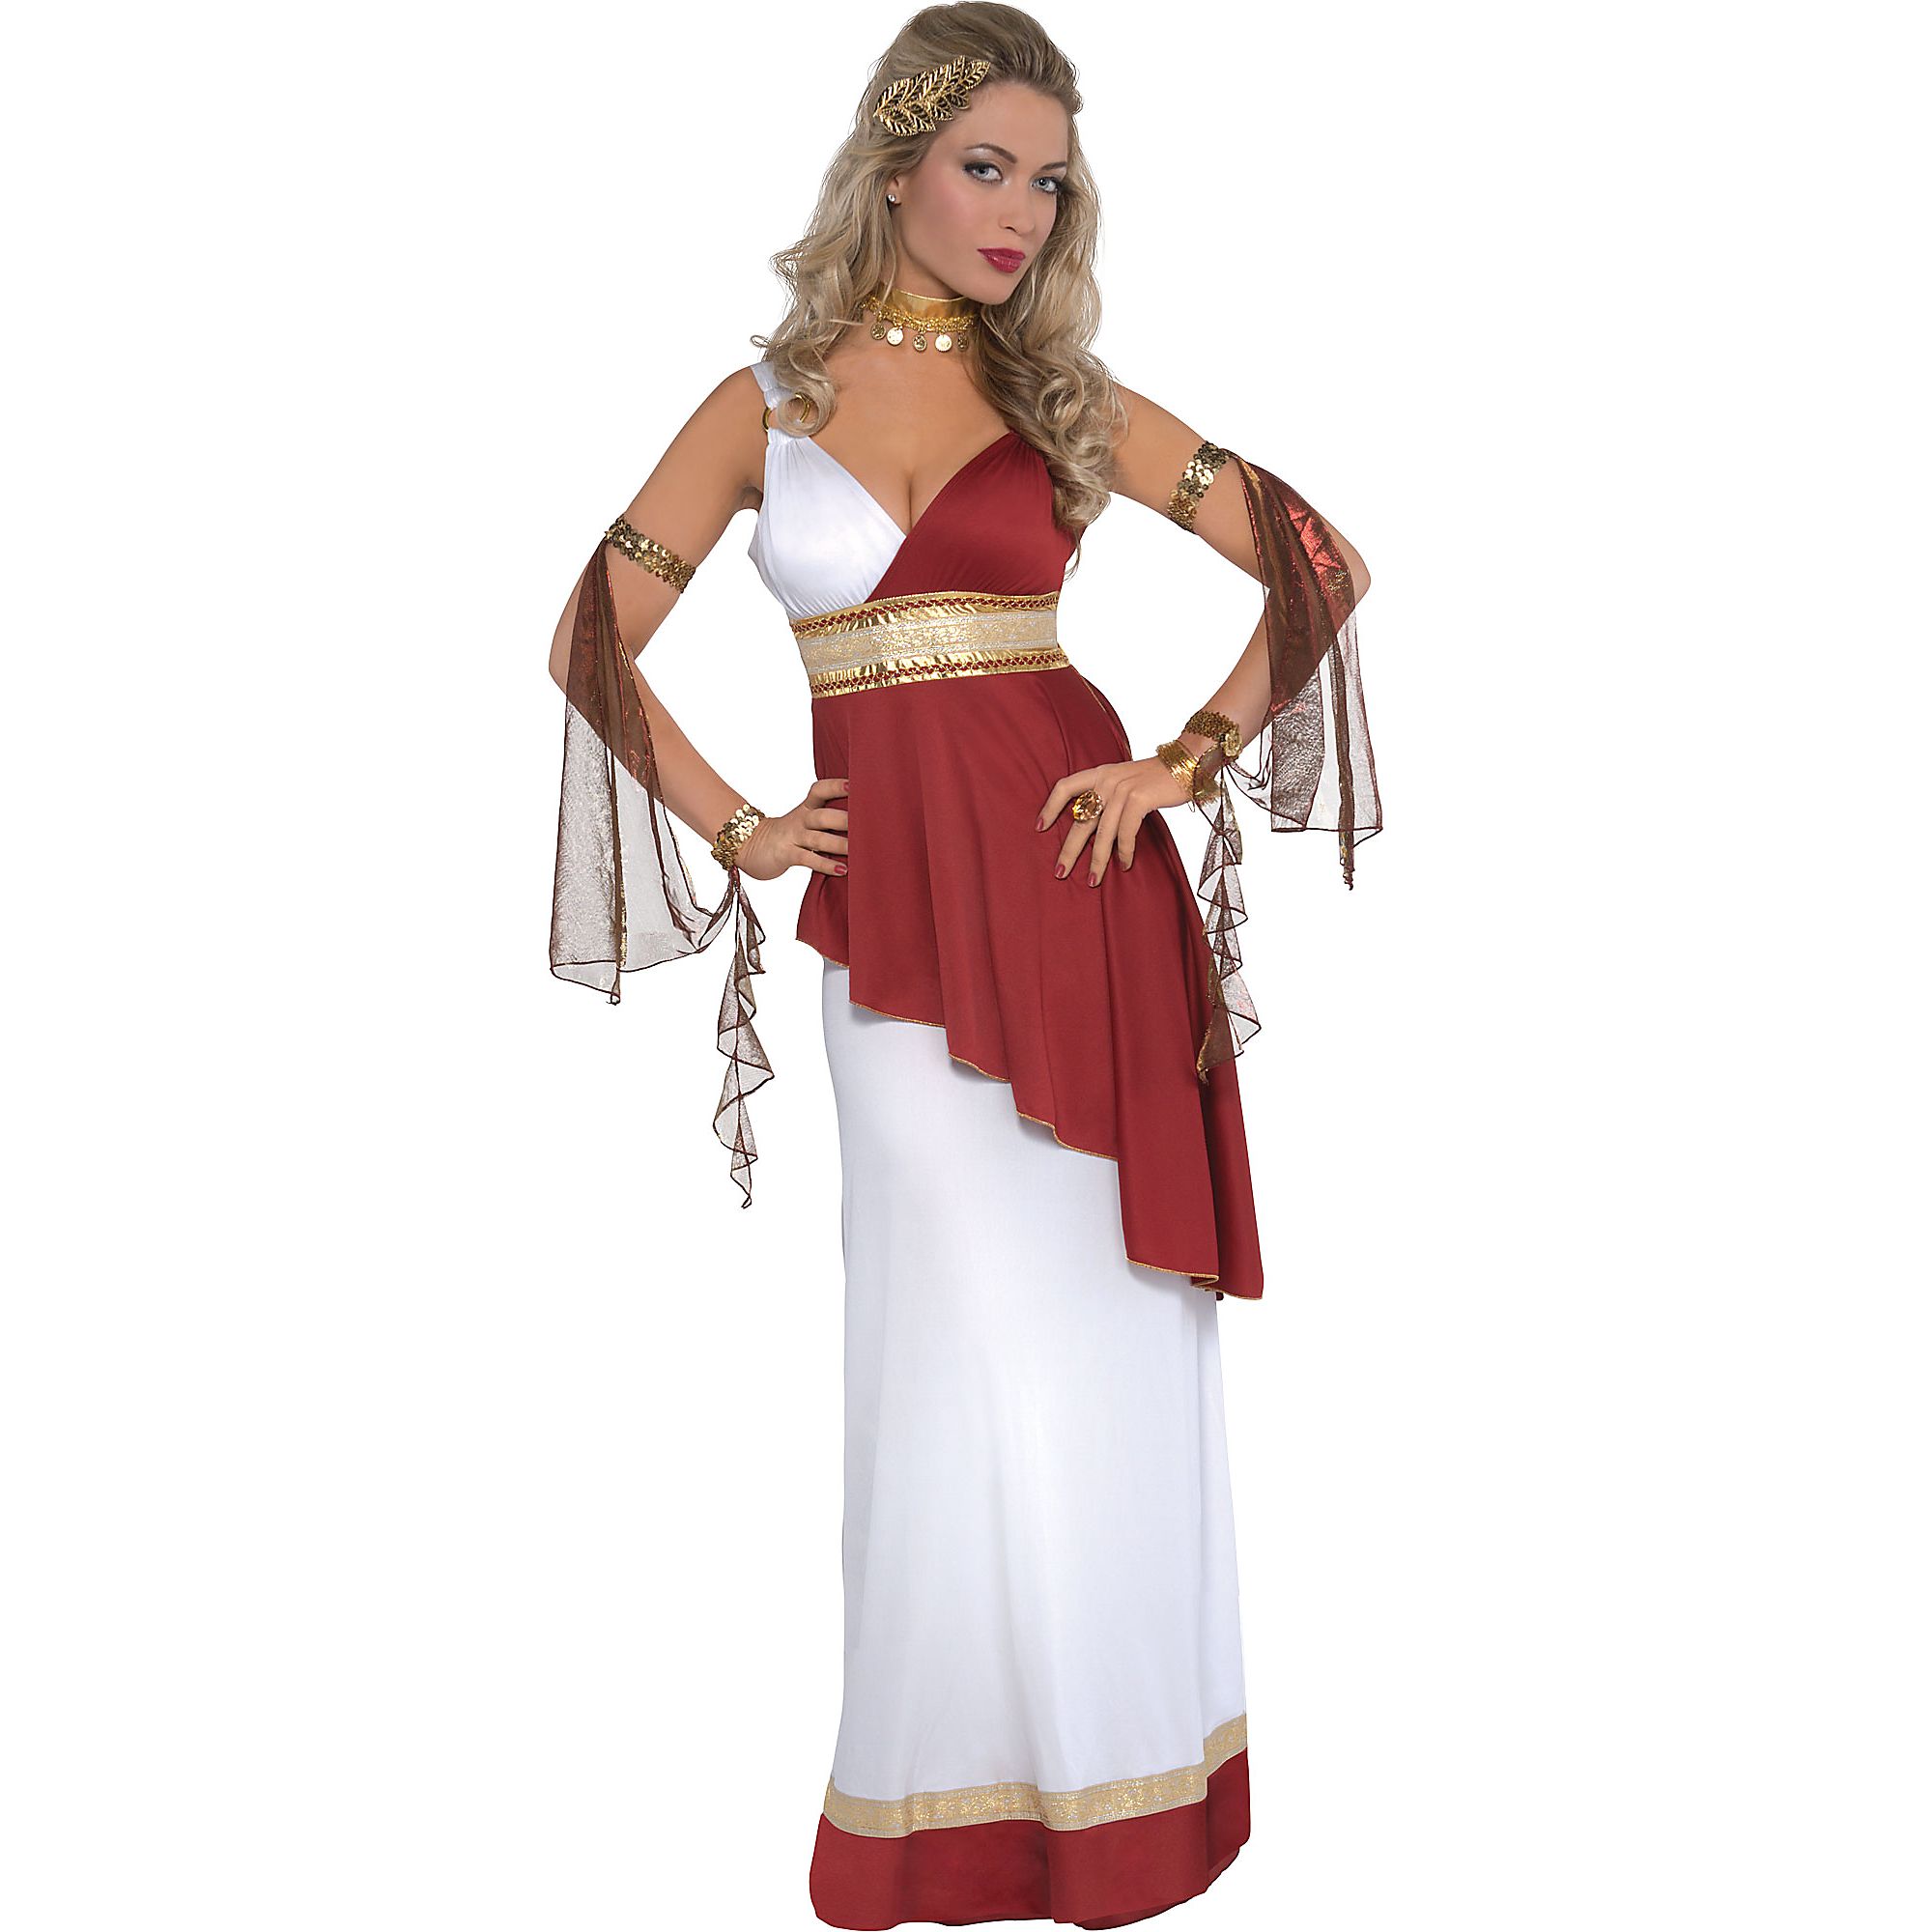 Imperial Empress Halloween Costume for Women,Small, with Accessories ...